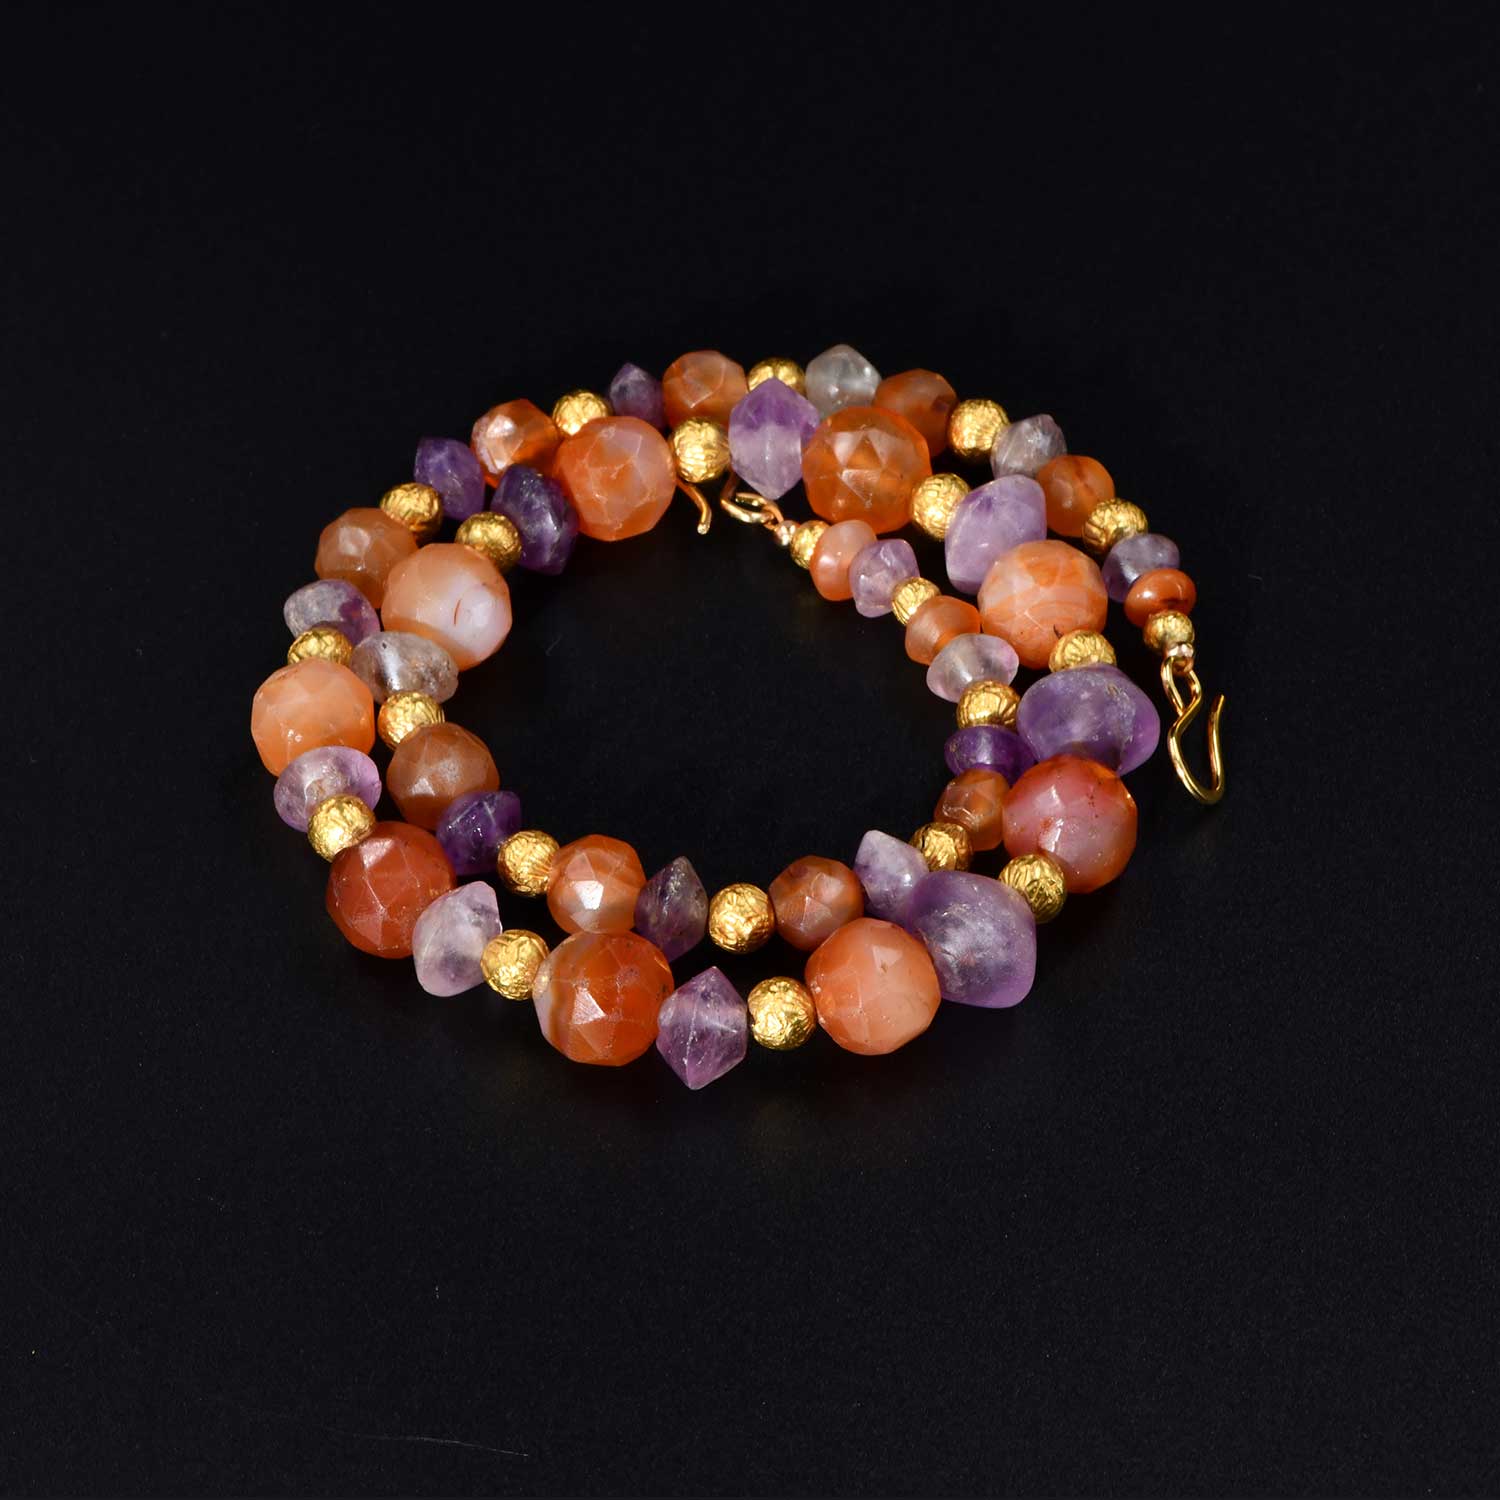 A Roman Amethyst and Carnelian Bead Necklace, ca. 1st - 2nd century CE